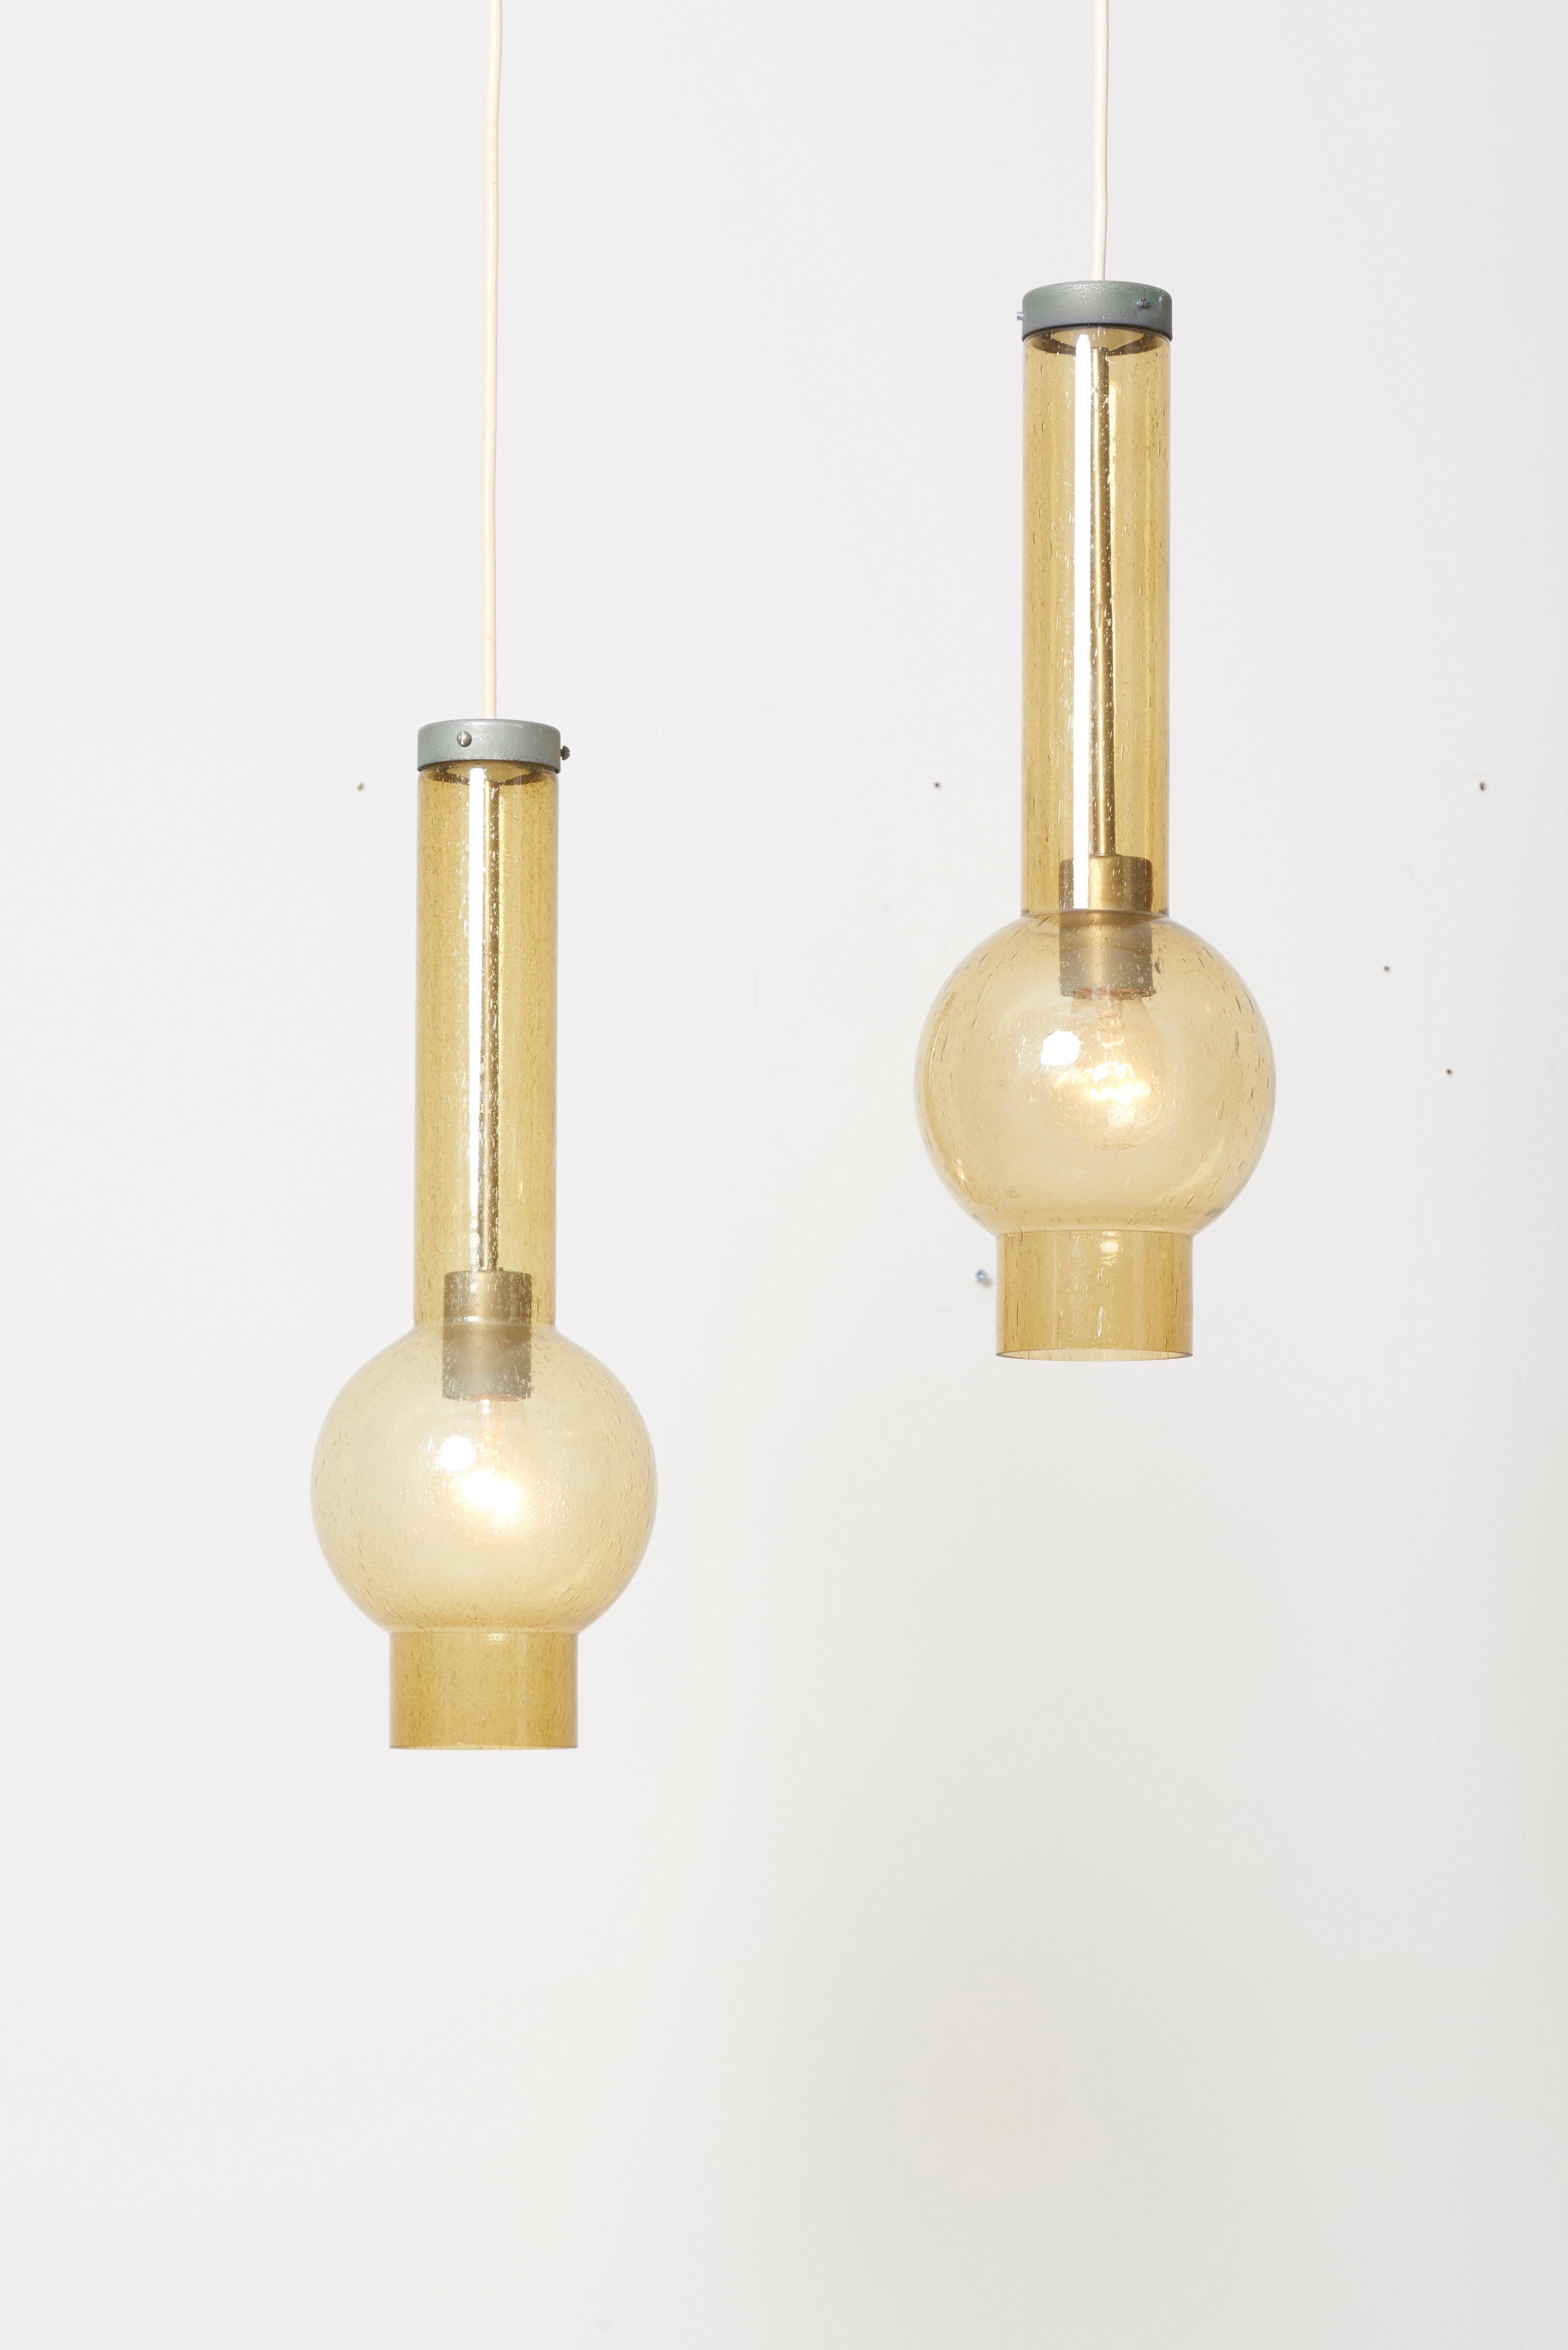 20th Century Pair of P1115 Glass Pendant Lamps by Staff, Germany, 1960s For Sale